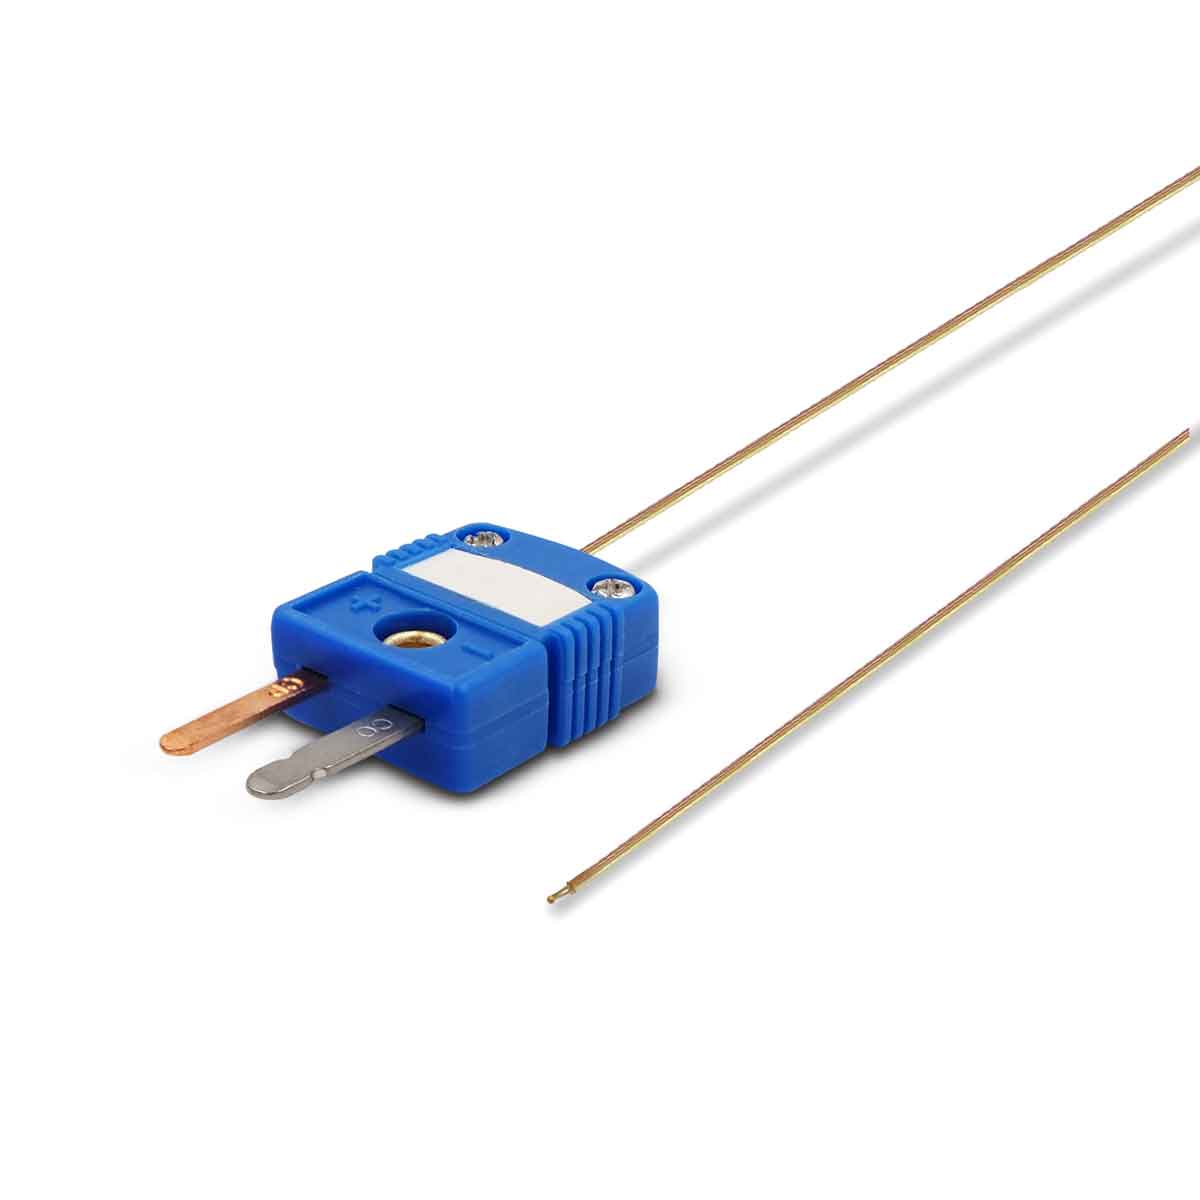 T-Type Thermocouple Probe, Male Flat Lead Connector, Brown Cable, main